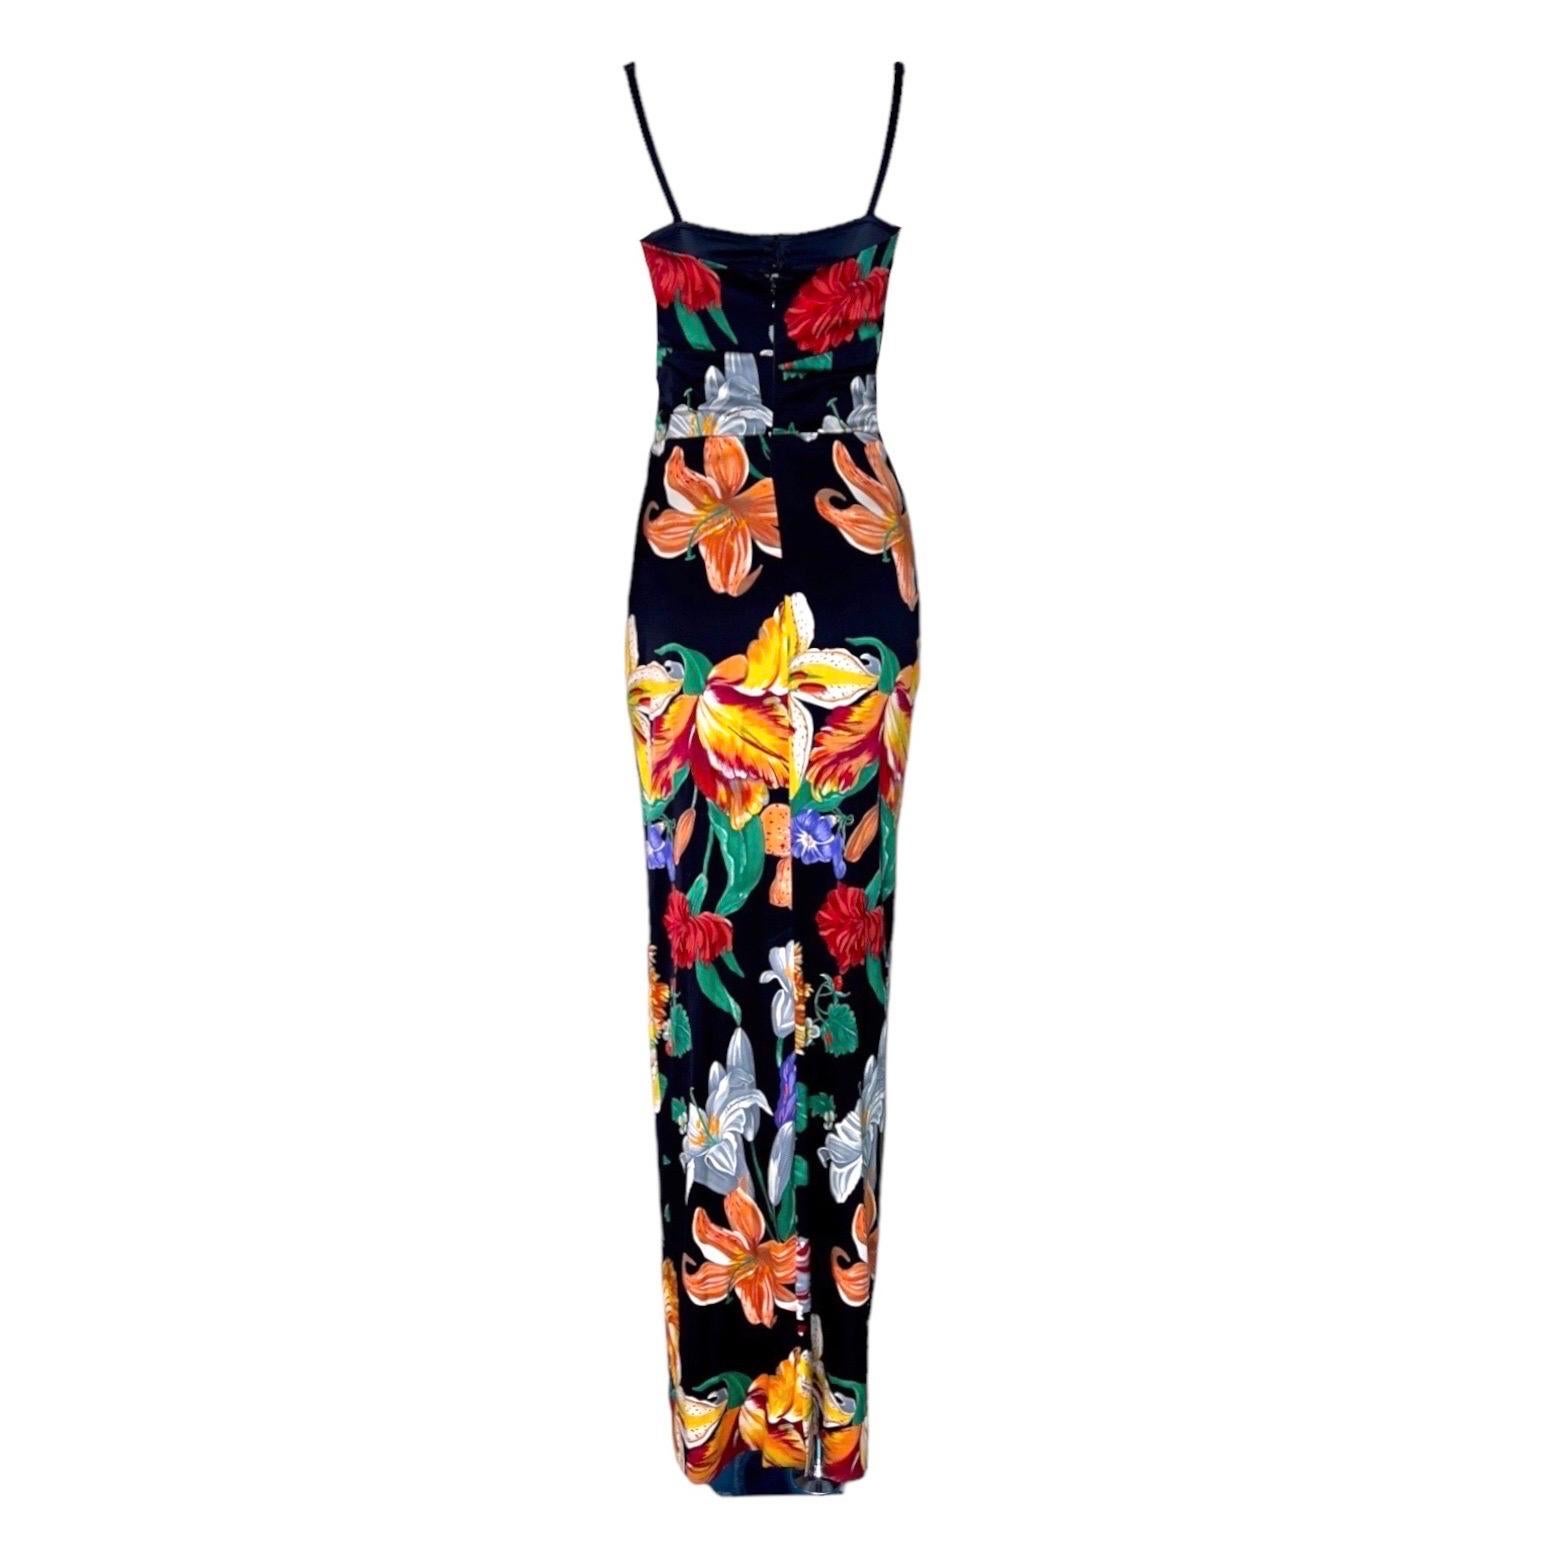 Unique Dolce & Gabbana Evening Dress
Beautifully hand-painted silk print with floral design
Zipper in the back
Draped look
Corset-like inner part for a perfect fit
Made in Italy
Dry Clean Only
The dress is a special piece and one of a kind, you will